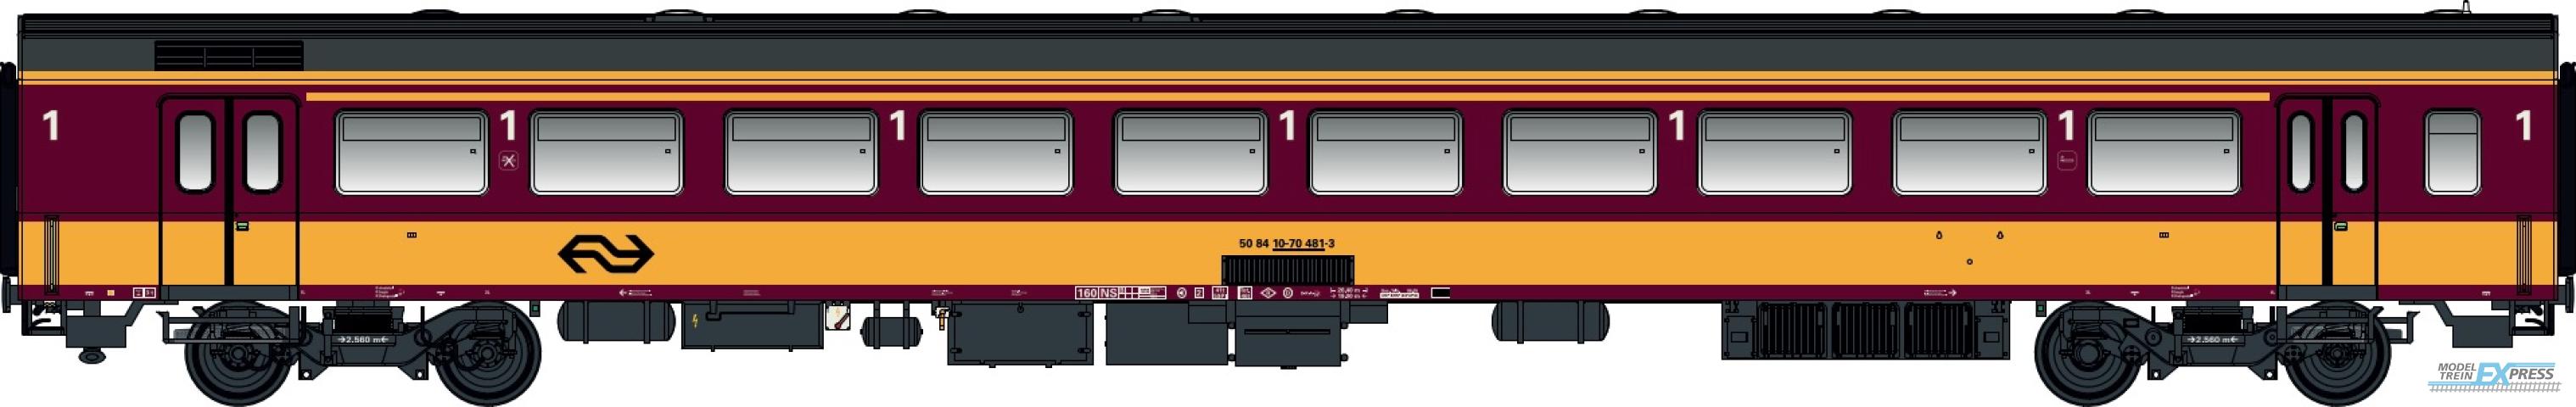 LS Models 44261 ICR, Benelux, rood, gele band, zonder airco  /  Ep. IV-VA  /  NS  /  HO  /  DC  /  1 P.